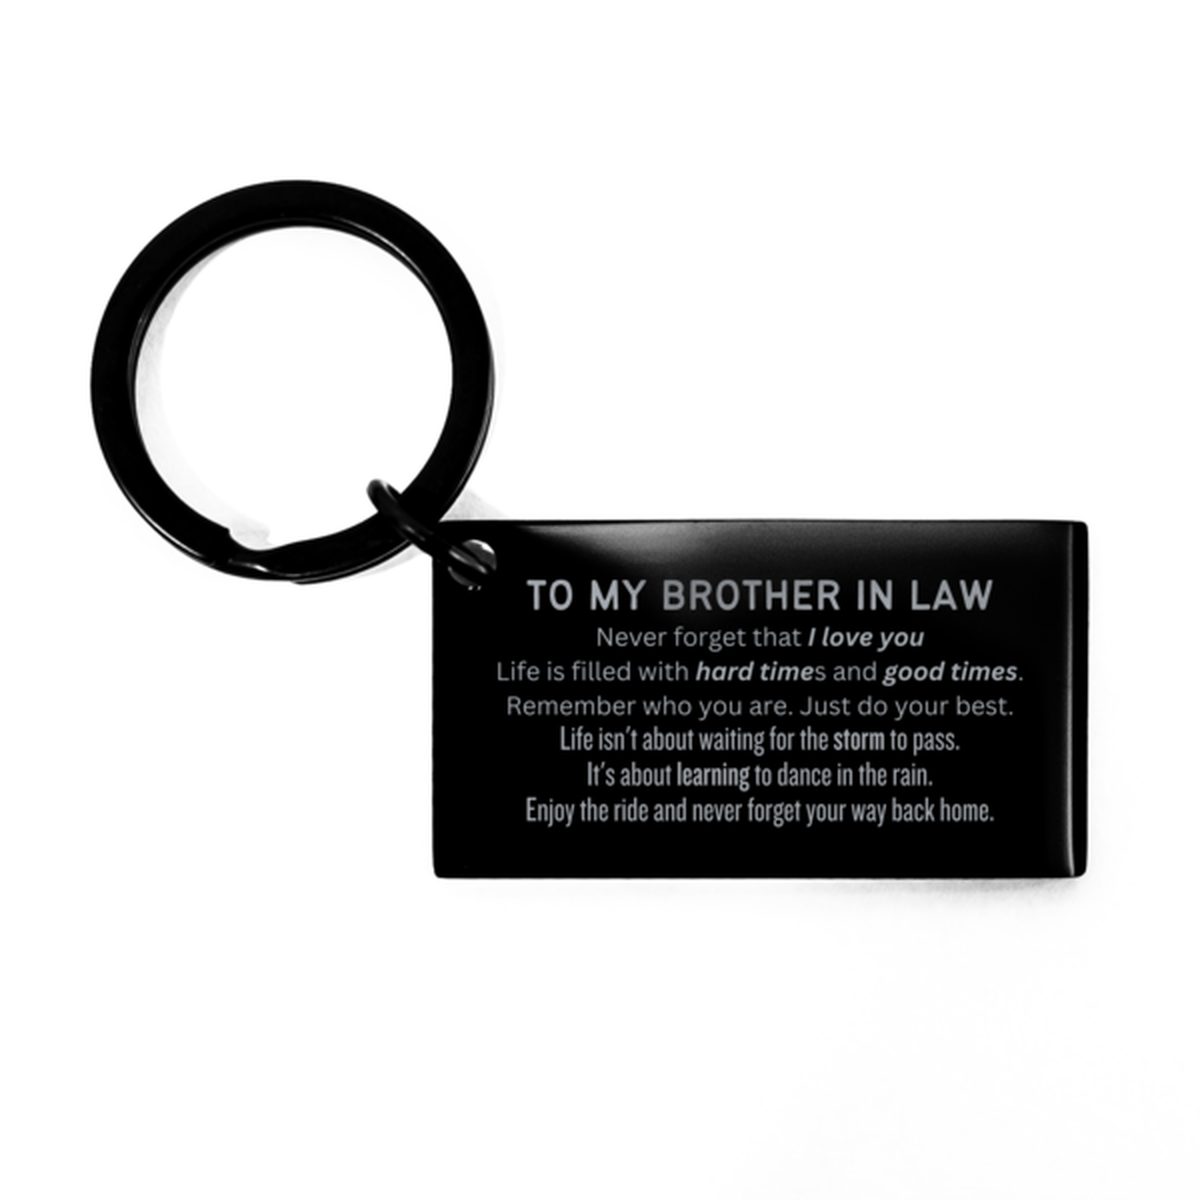 Christmas Brother In Law Keychain Gifts, To My Brother In Law Birthday Thank You Gifts For Brother In Law, Graduation Unique Gifts For Brother In Law To My Brother In Law Never forget that I love you life is filled with hard times and good times. Remember